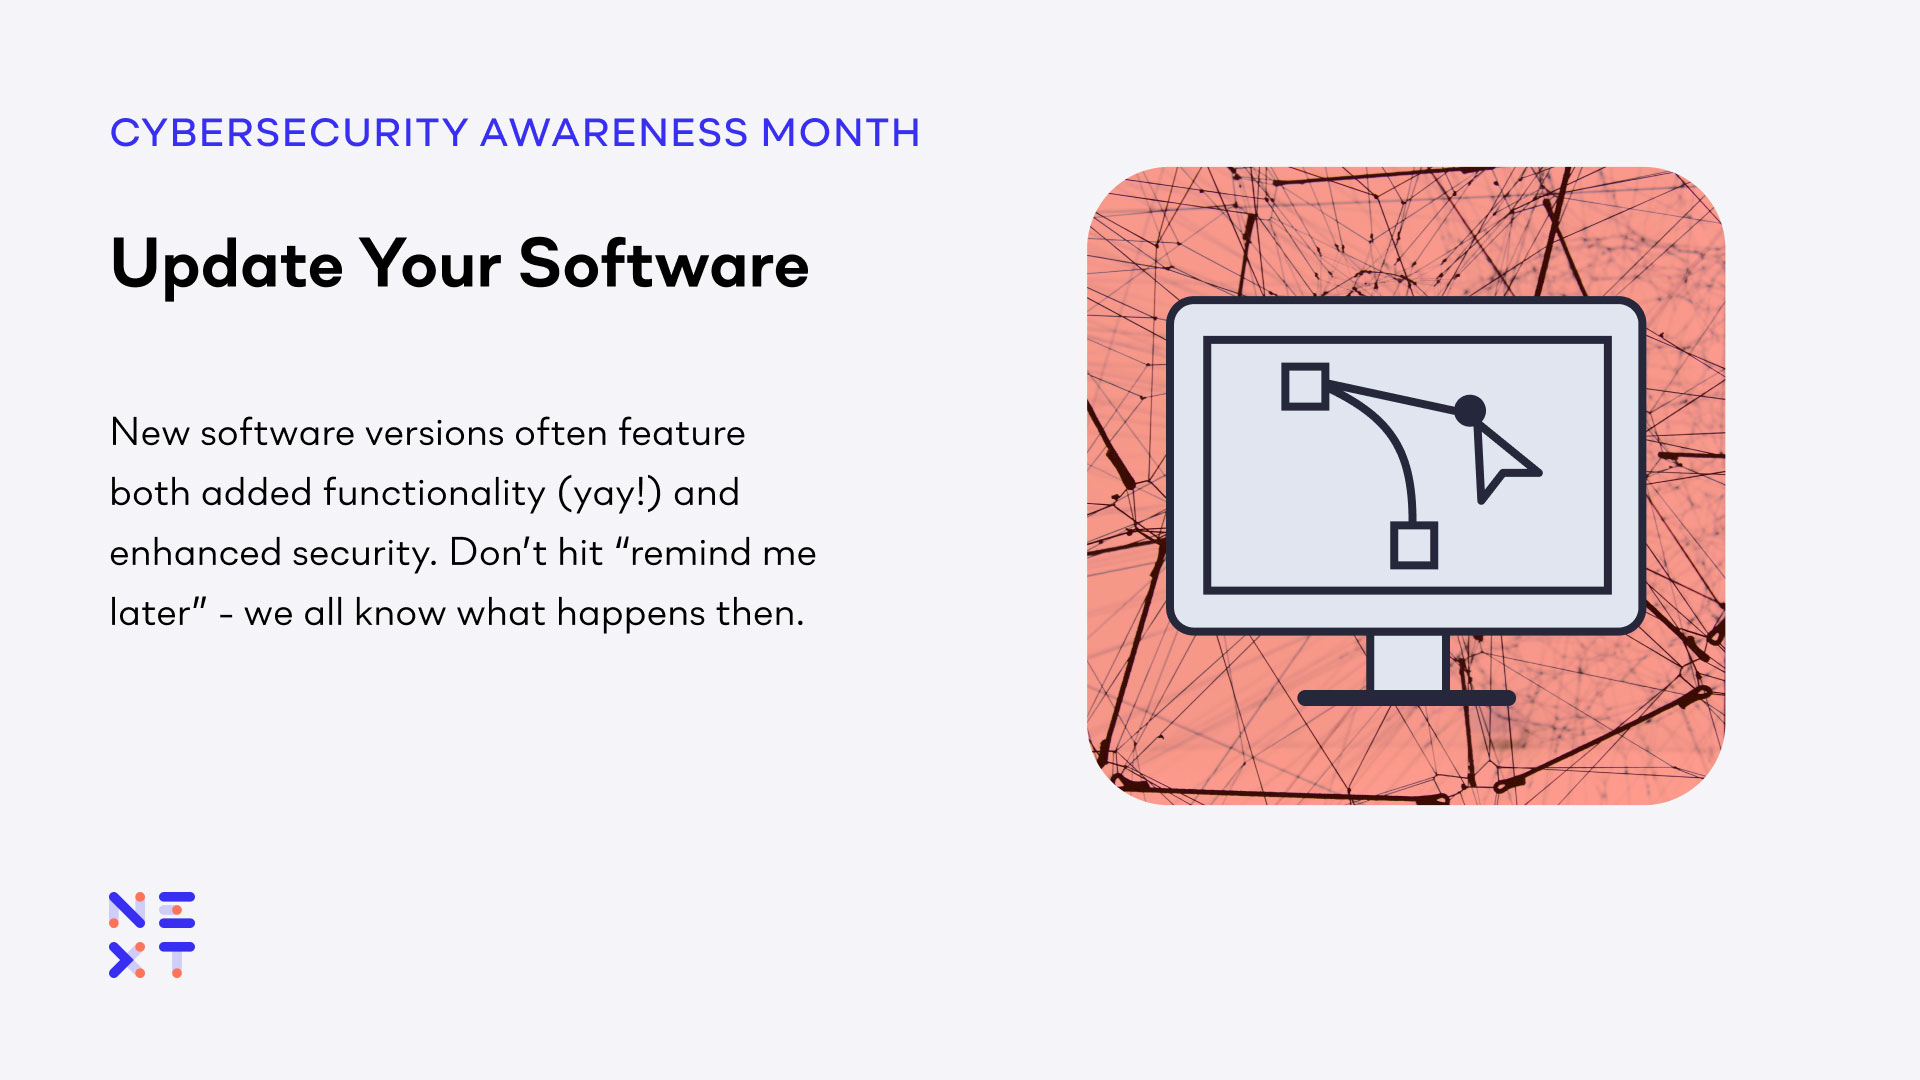 Update your software - Cybersecurity Awareness Month